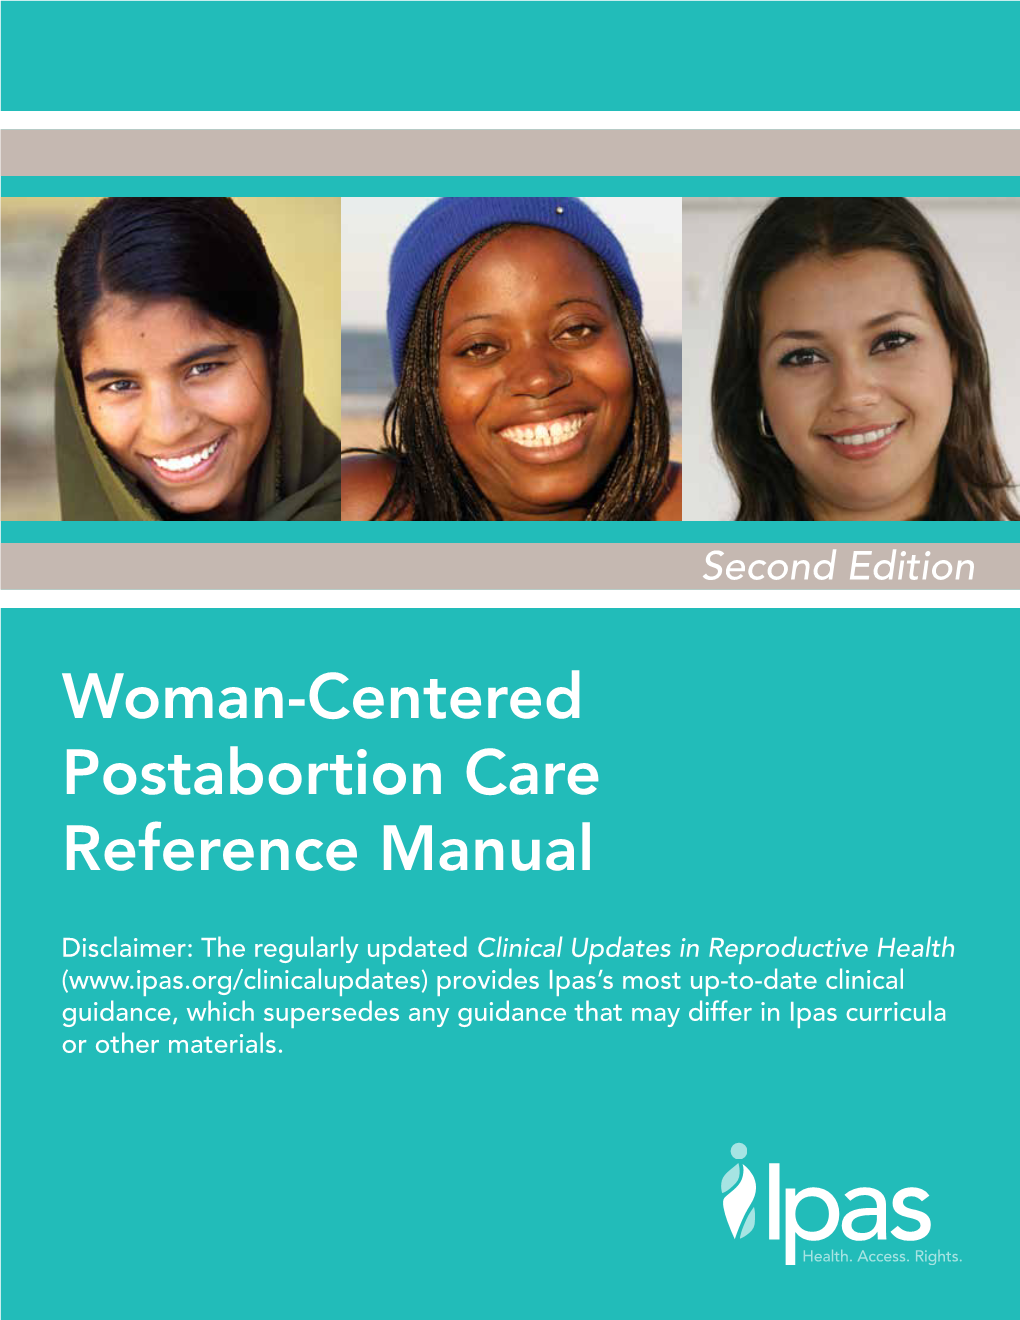 Woman-Centered Postabortion Care Reference Manual